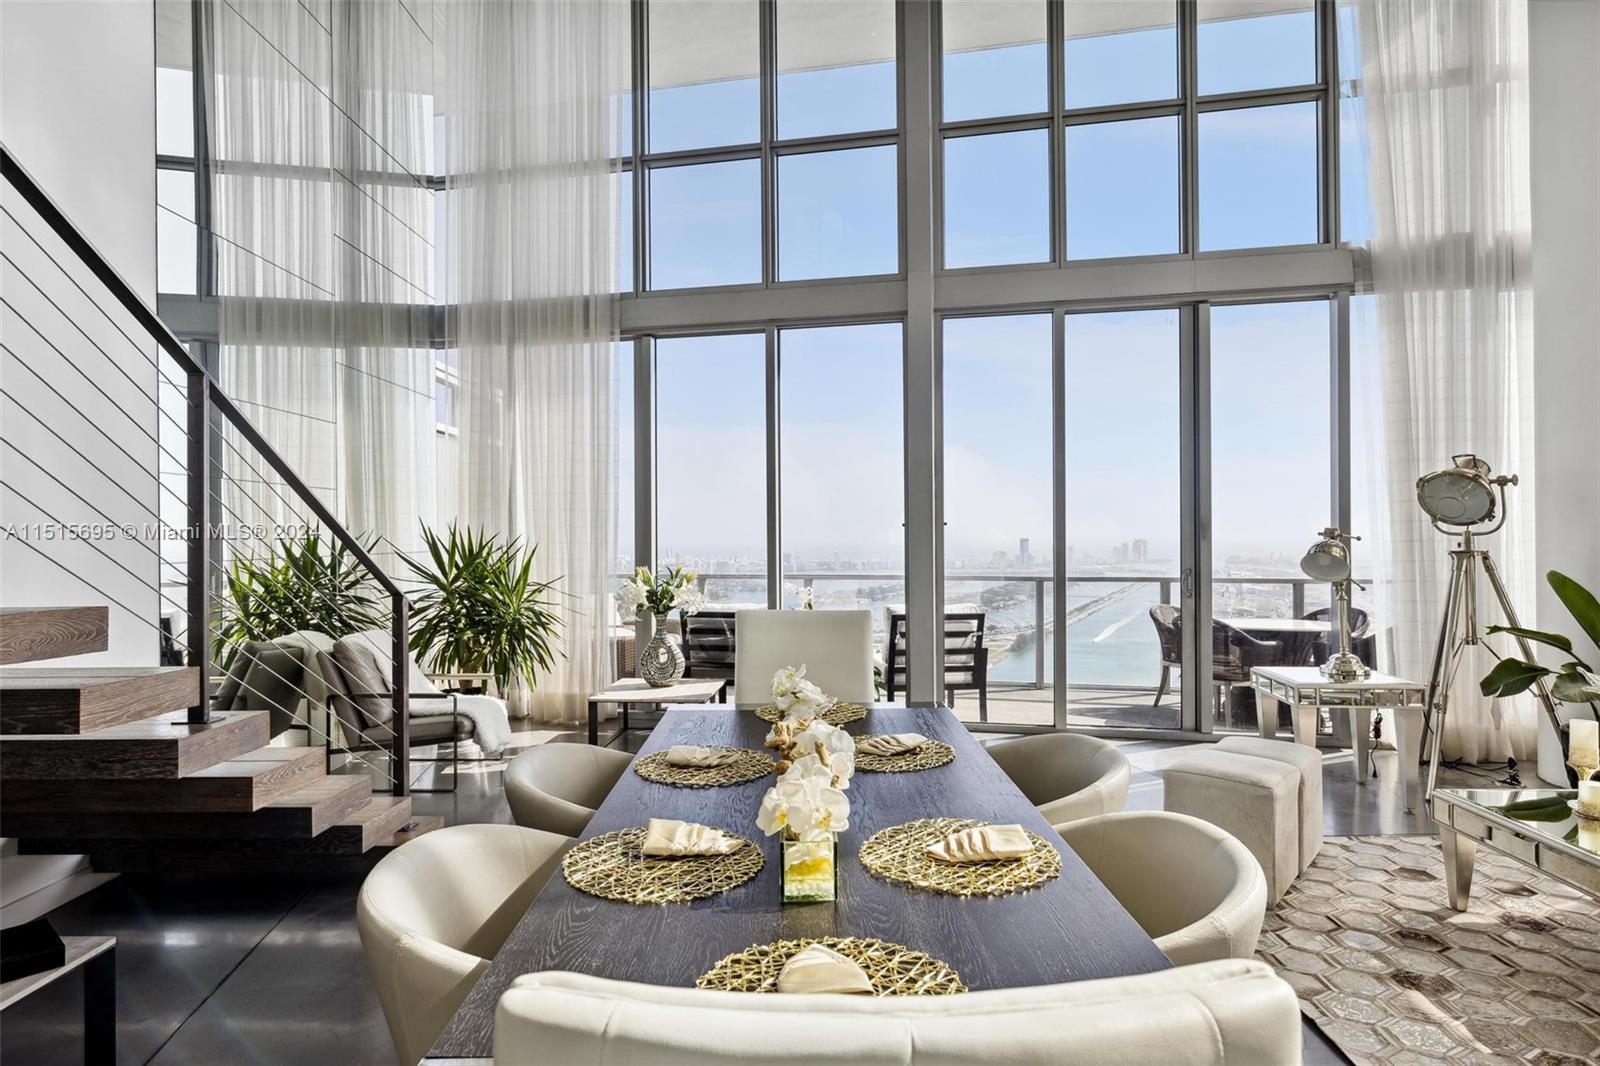 This exceptional 3-level penthouse, perched on the 63rd floor, features 3 bedrooms and 4.5 bathrooms